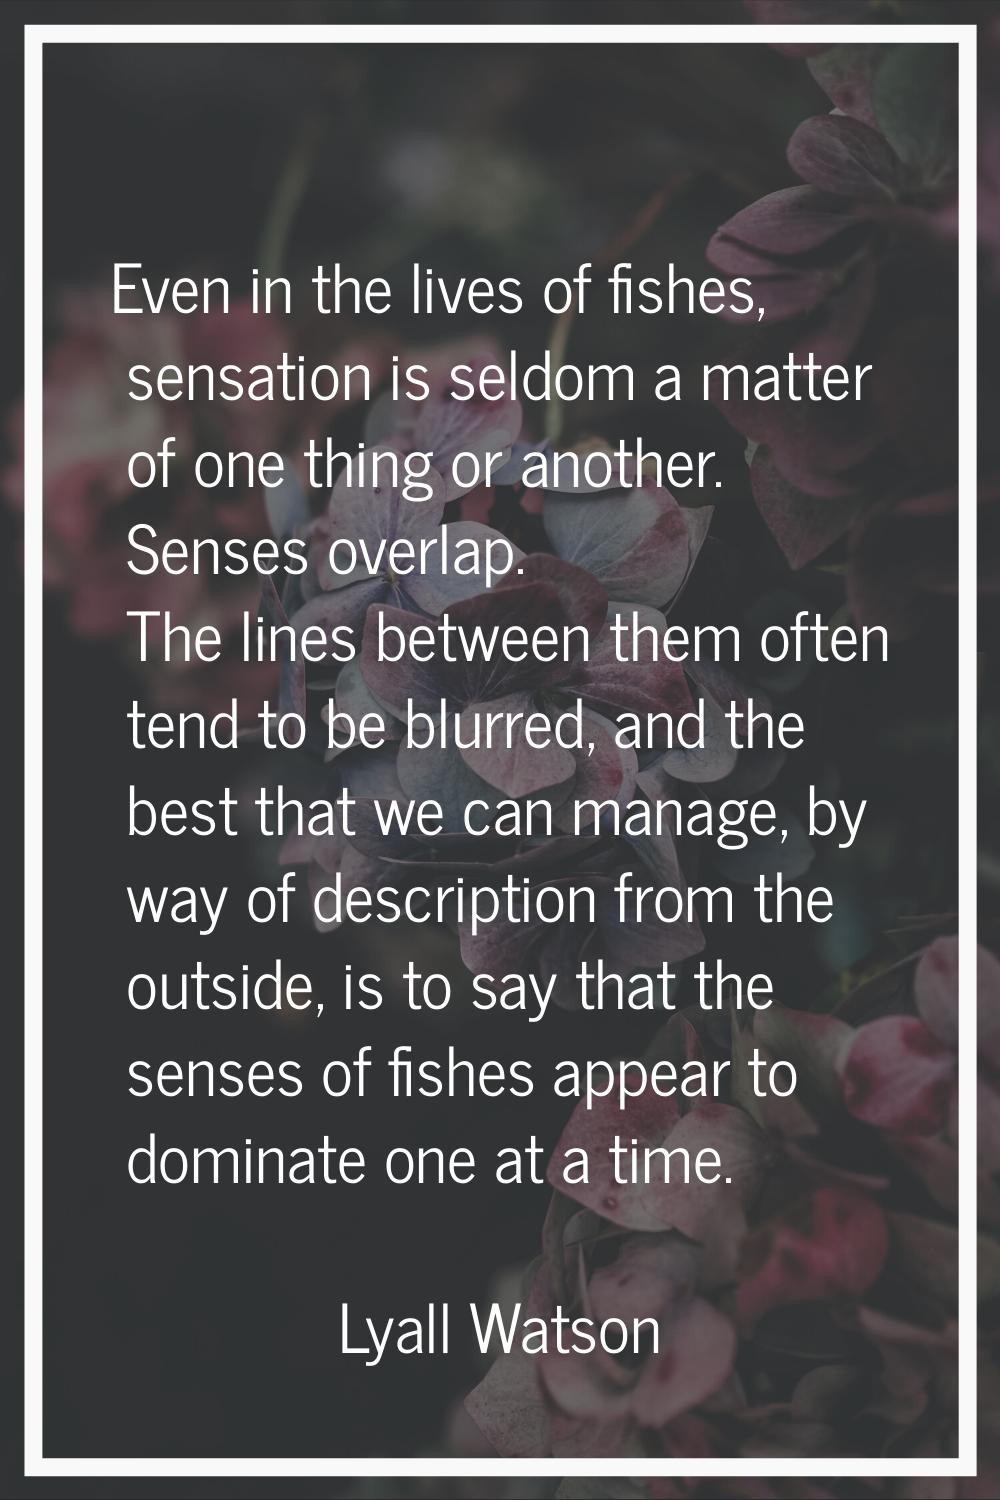 Even in the lives of fishes, sensation is seldom a matter of one thing or another. Senses overlap. 